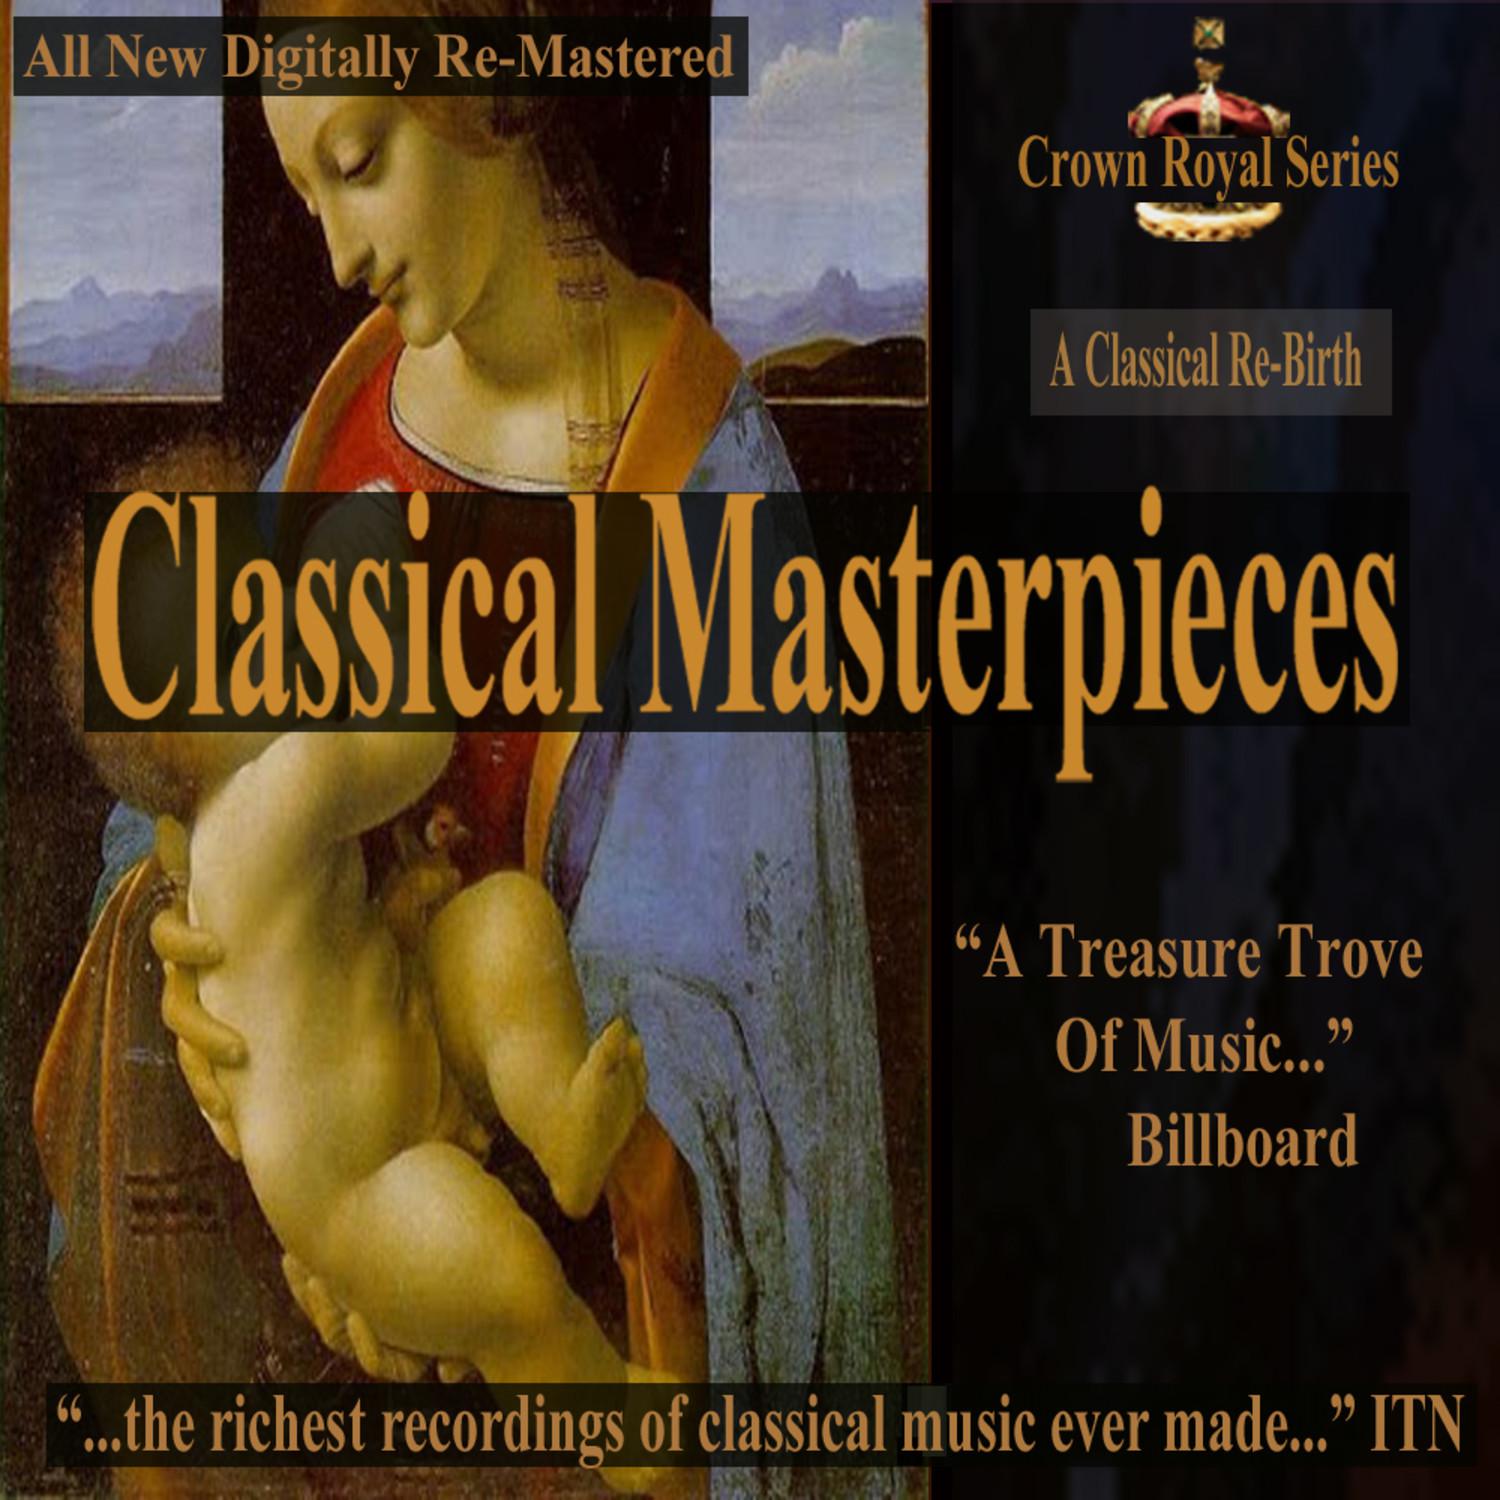 A Classical Re-Birth - Classical Masterpieces